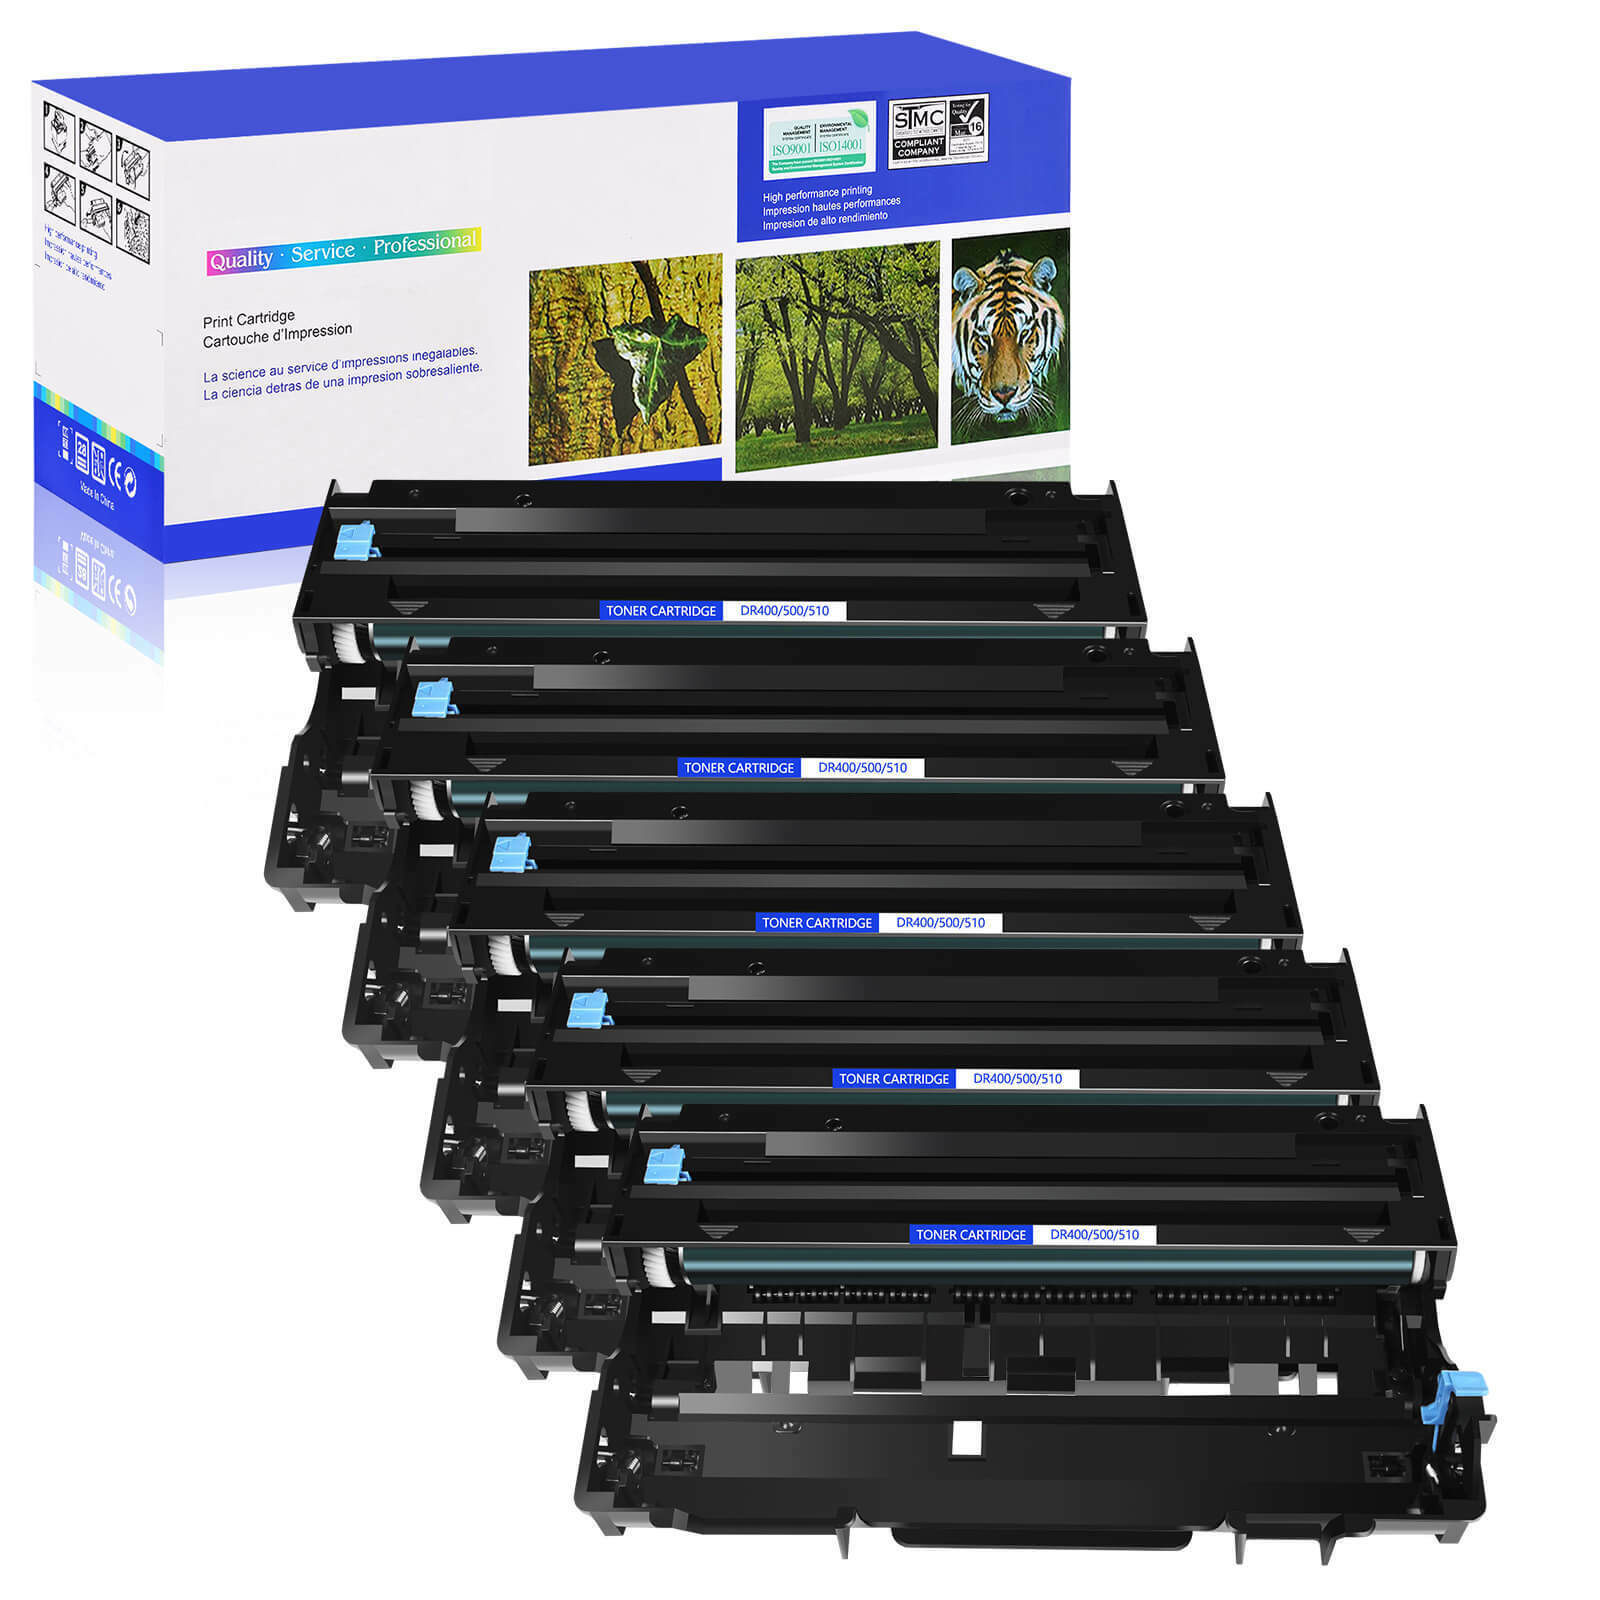 5 PACK DR400 Drum Unit For Brother DR-400 DCP-1200 DCP-1400 FAX-8350p HL-1030